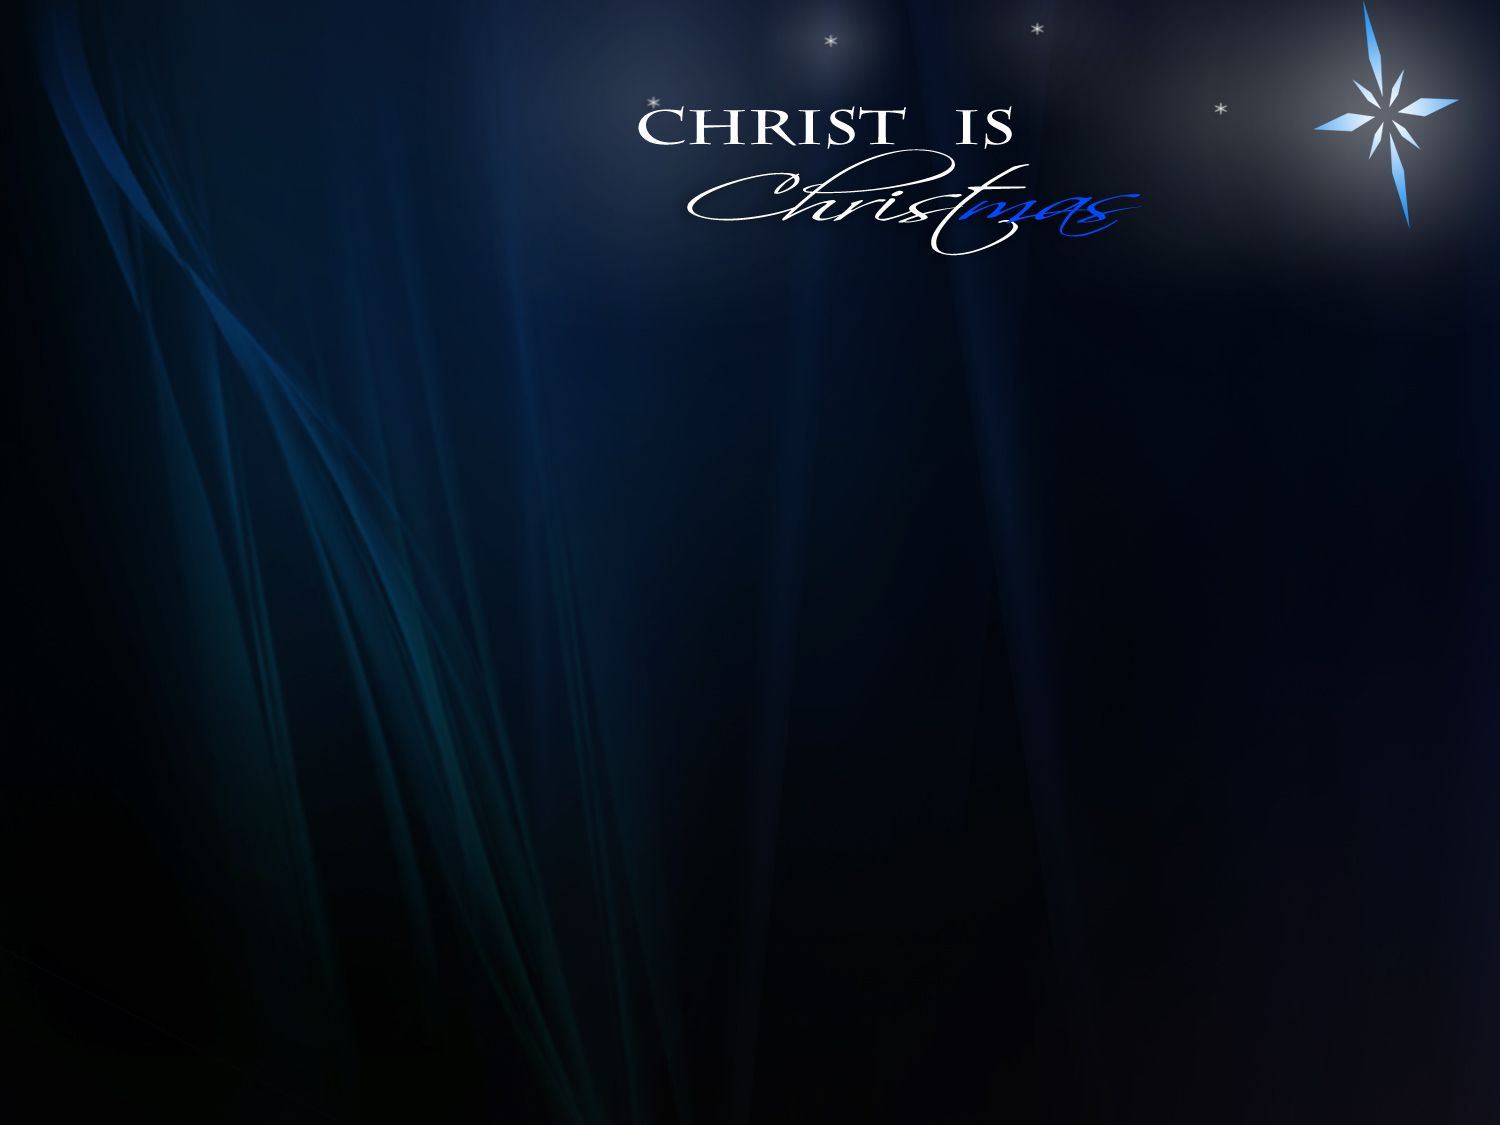 Religious Christmas Wallpaper Background Image In